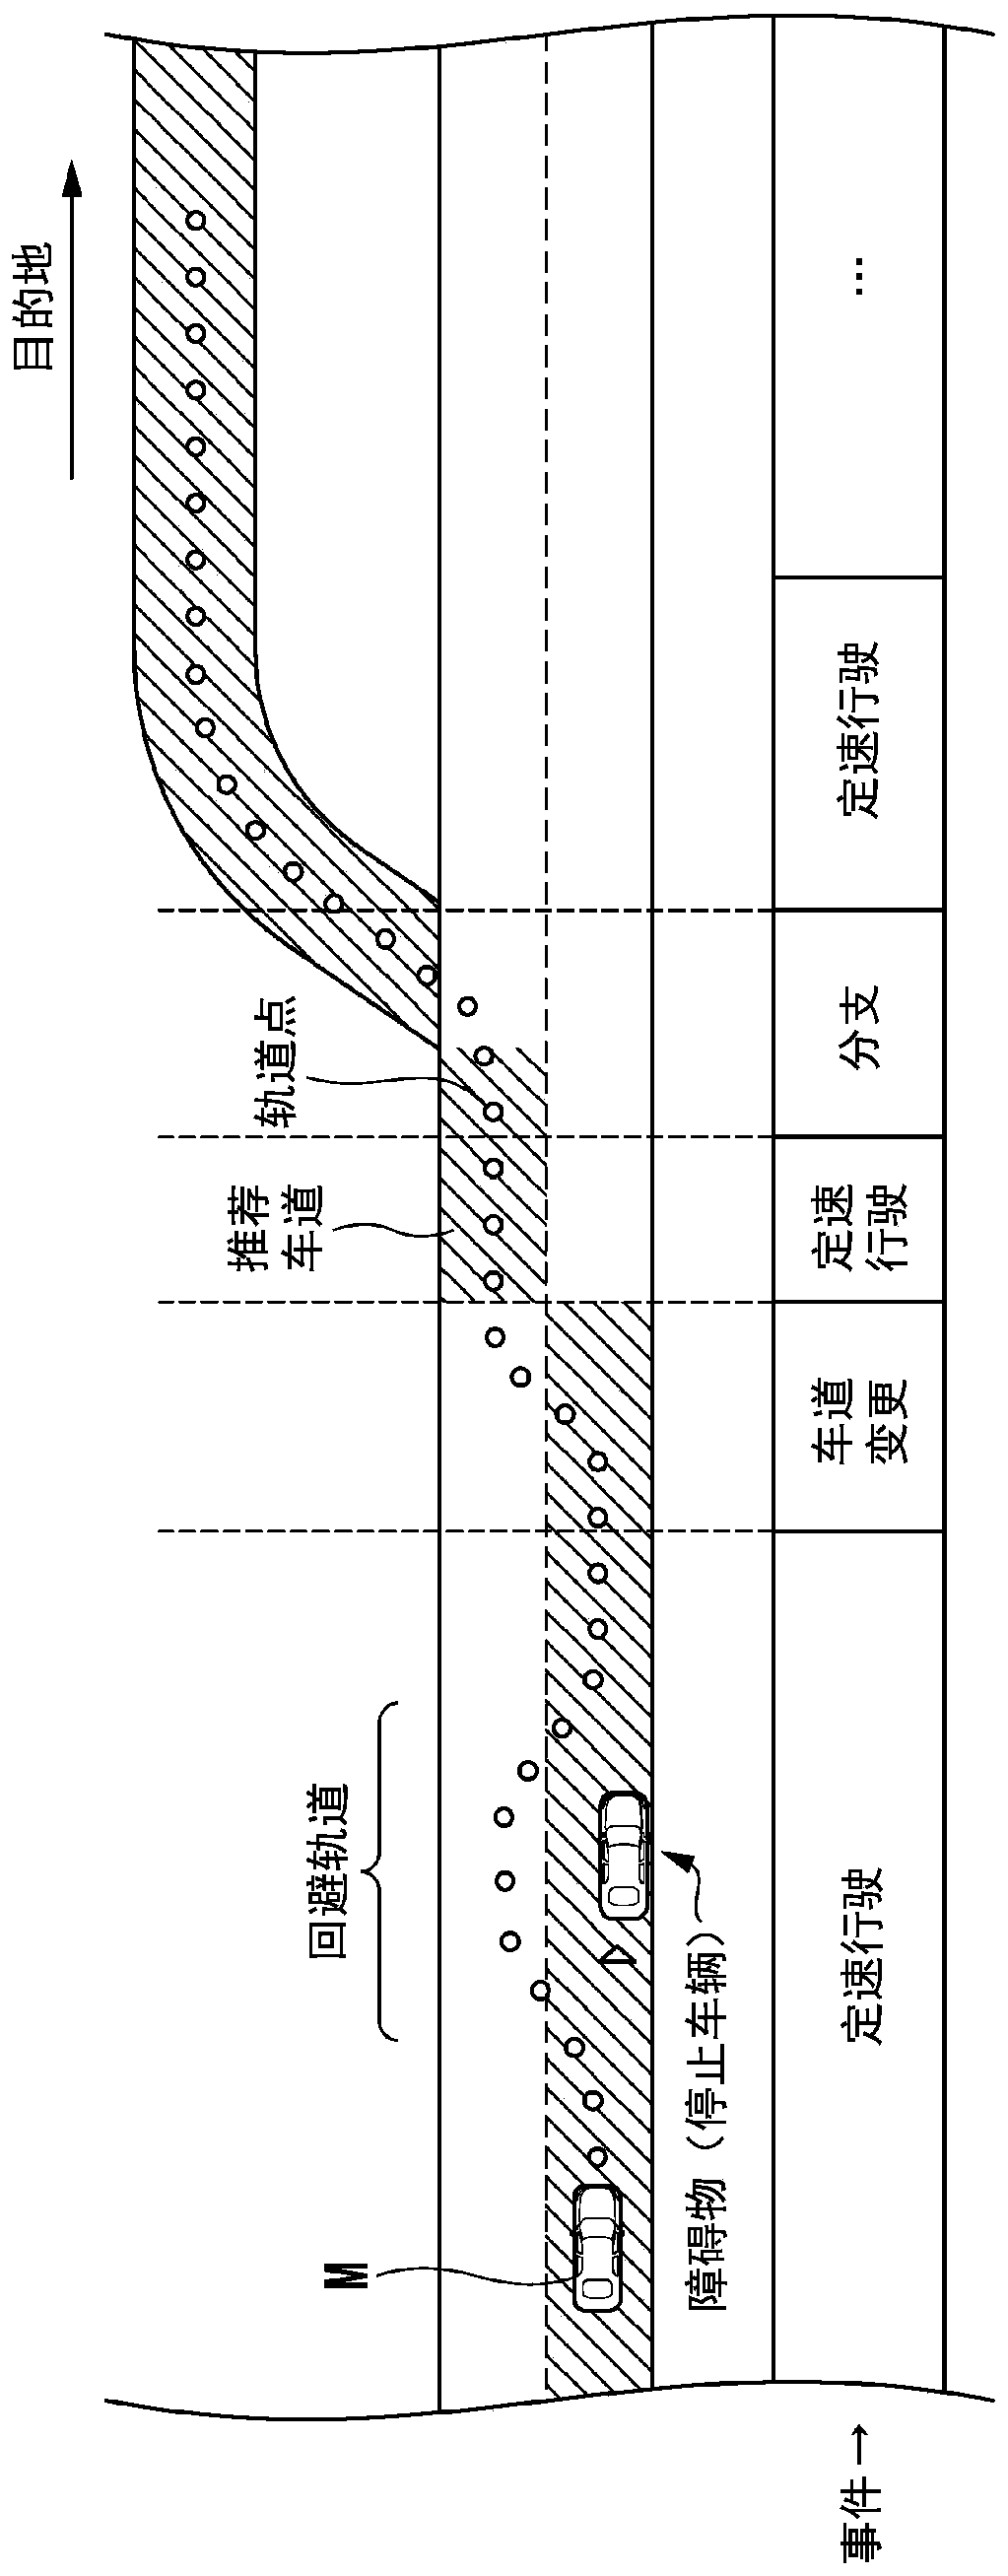 Vehicle control system, vehicle control method, and vehicle control program